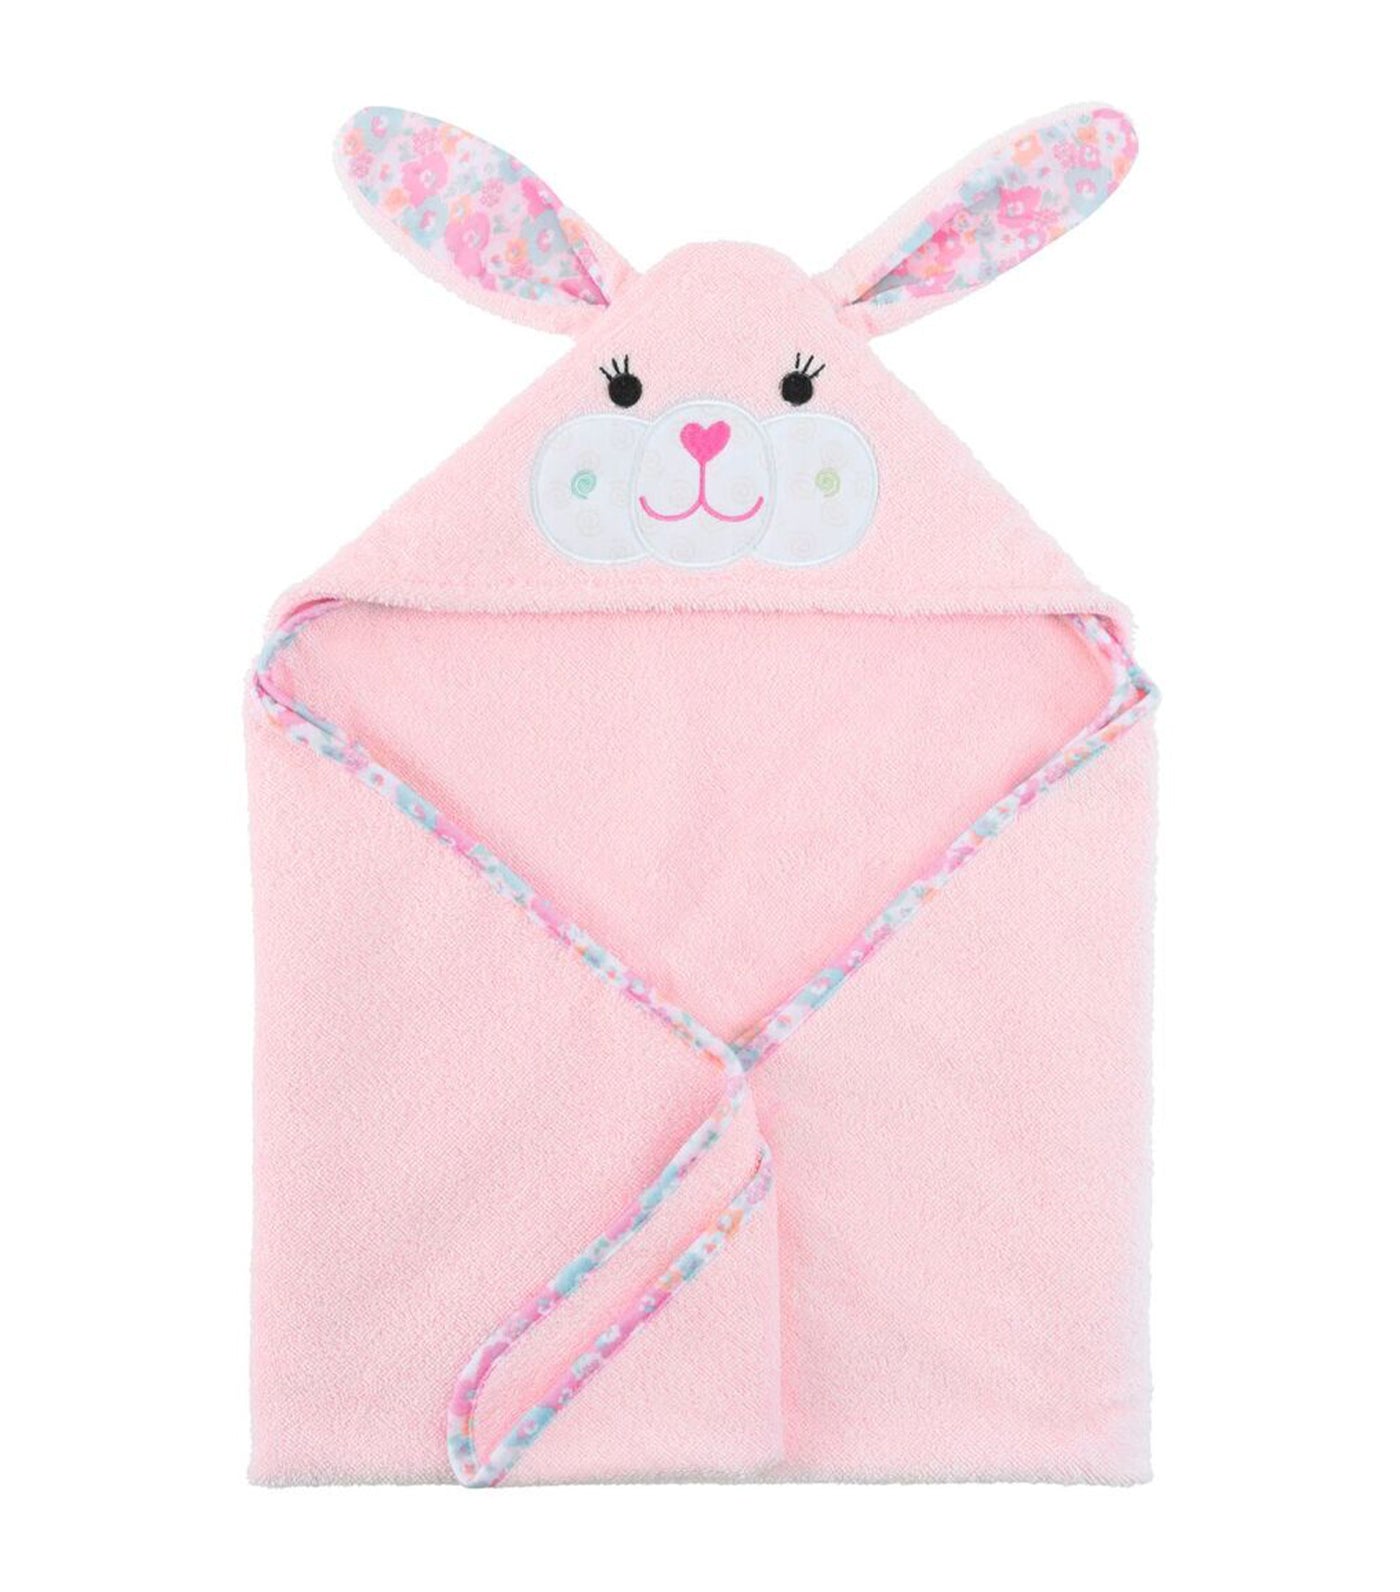 zoocchini baby hooded towel - beatrice the bunny